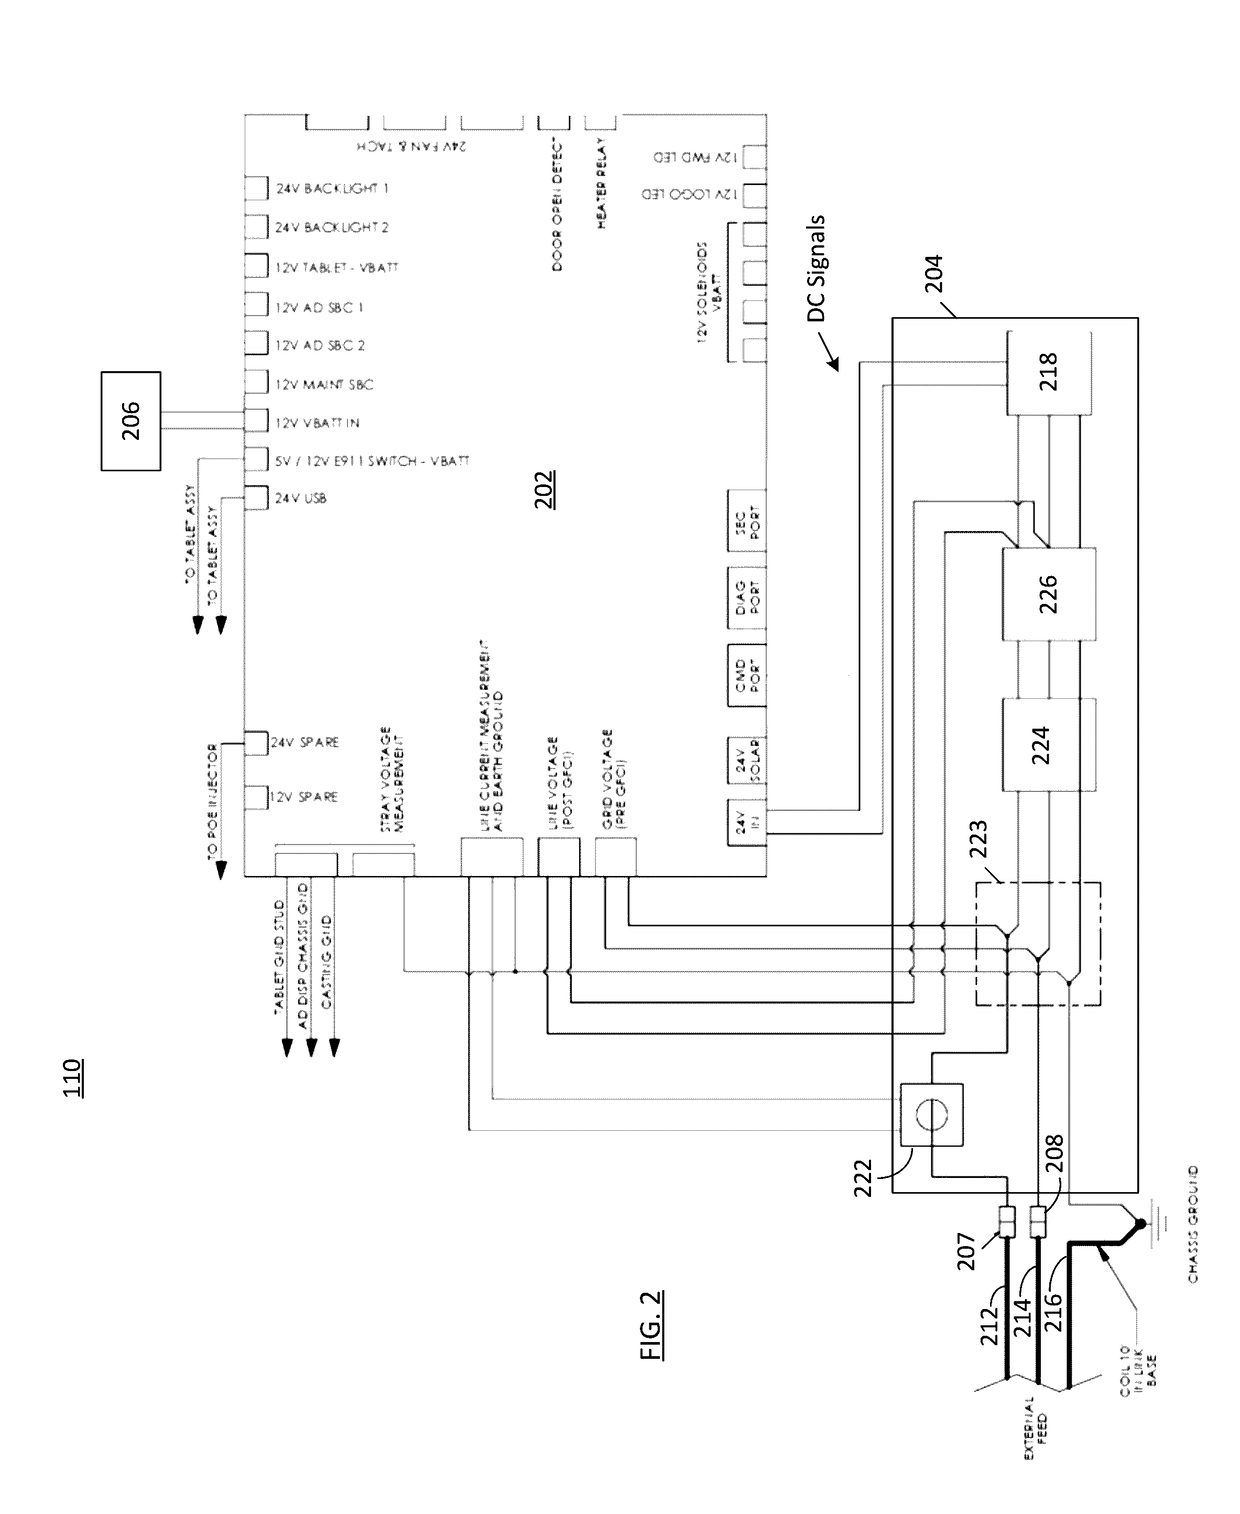 Systems and methods for field replacement of serviceable units